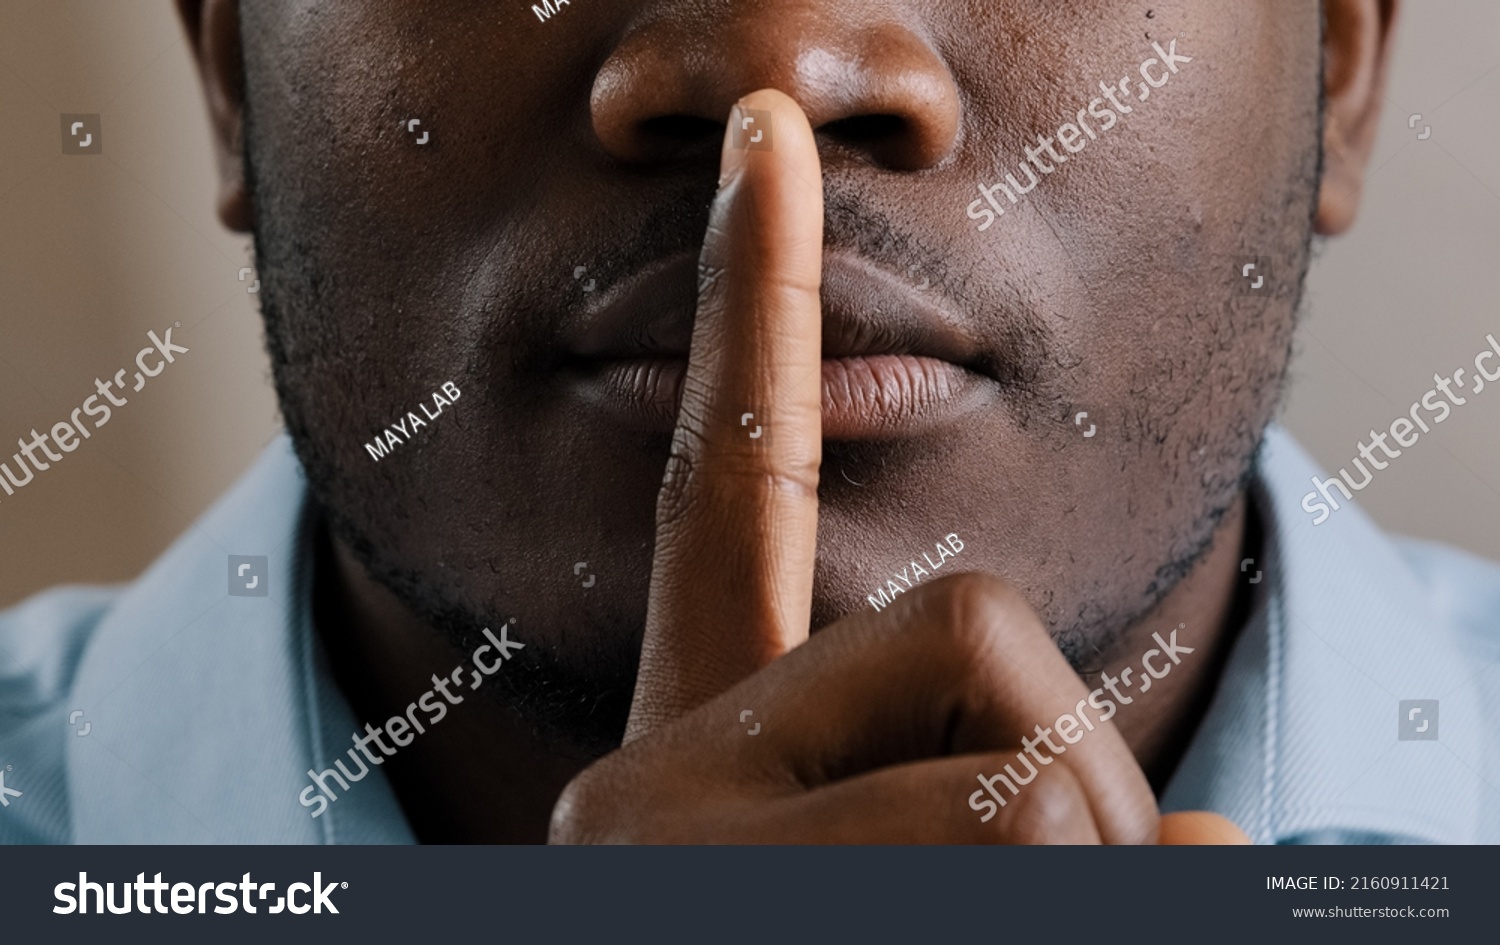 Mysterious unknown male face part african american adult man put finger to lips ask be quiet make gesture silence show secrecy sign keep secret confident information silent forbid tell close up view #2160911421